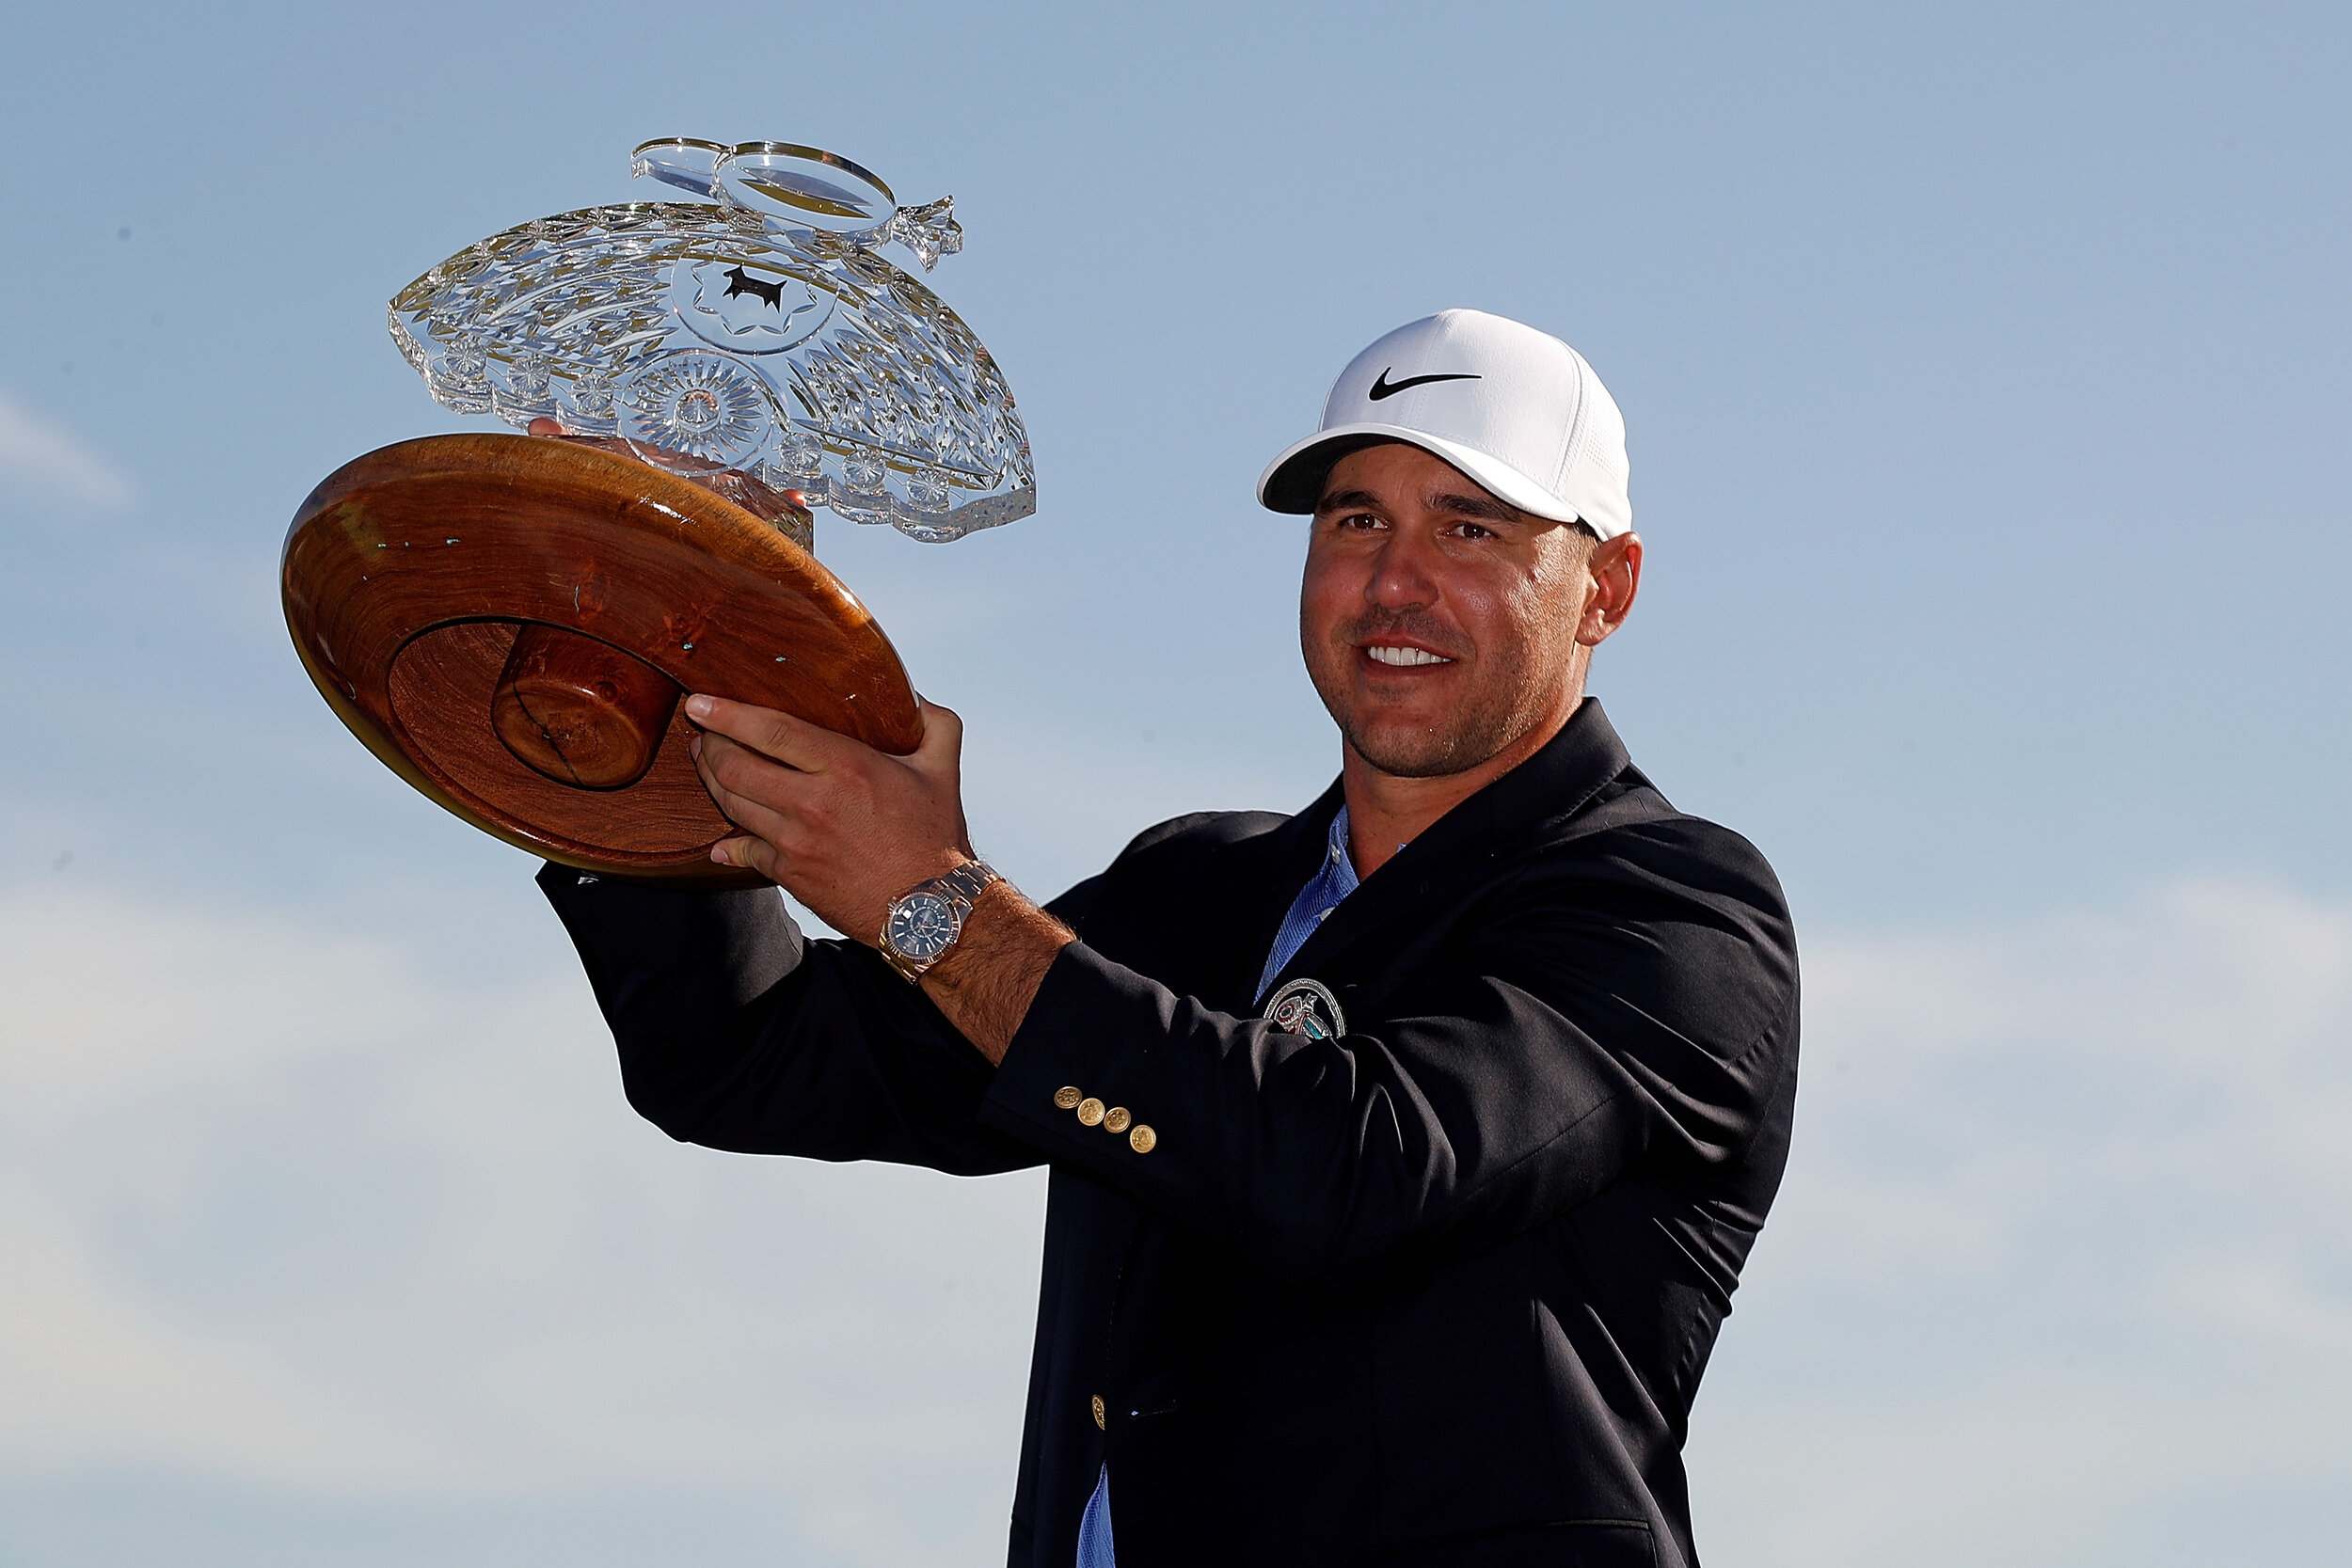  SCOTTSDALE, ARIZONA - FEBRUARY 07: Brooks Koepka of the United States poses with the trophy after winning the Waste Management Phoenix Open at TPC Scottsdale on February 07, 2021 in Scottsdale, Arizona. (Photo by Christian Petersen/Getty Images) 